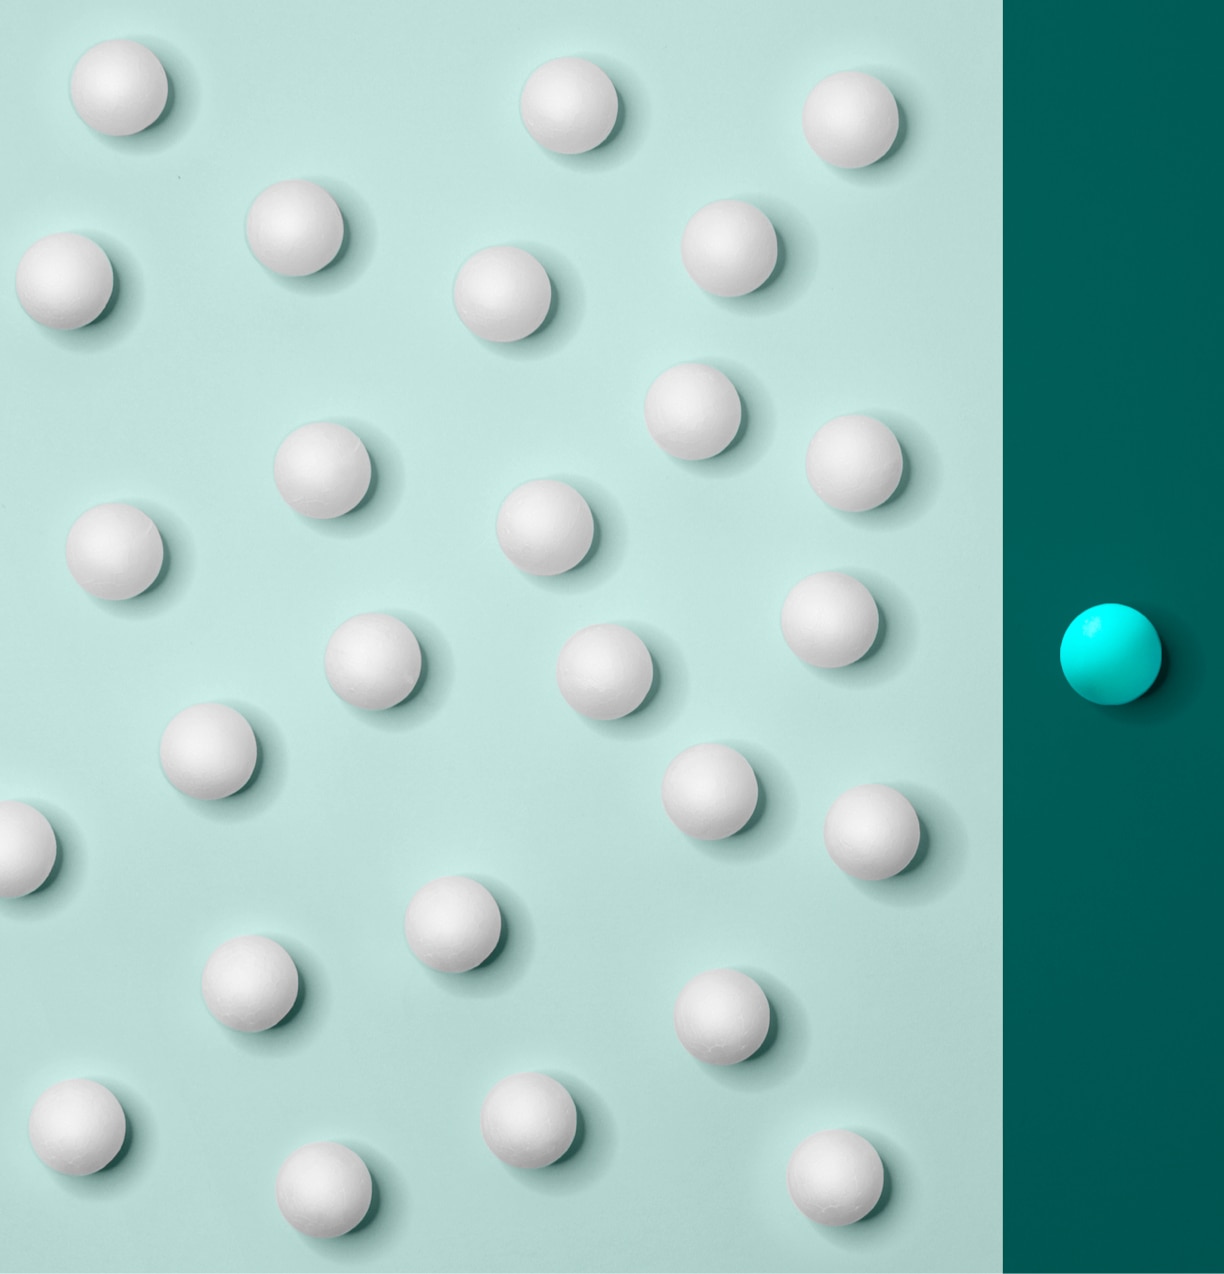 Illustration showing several balls on a light blue background and one other ball by itself on a dark blue background. 